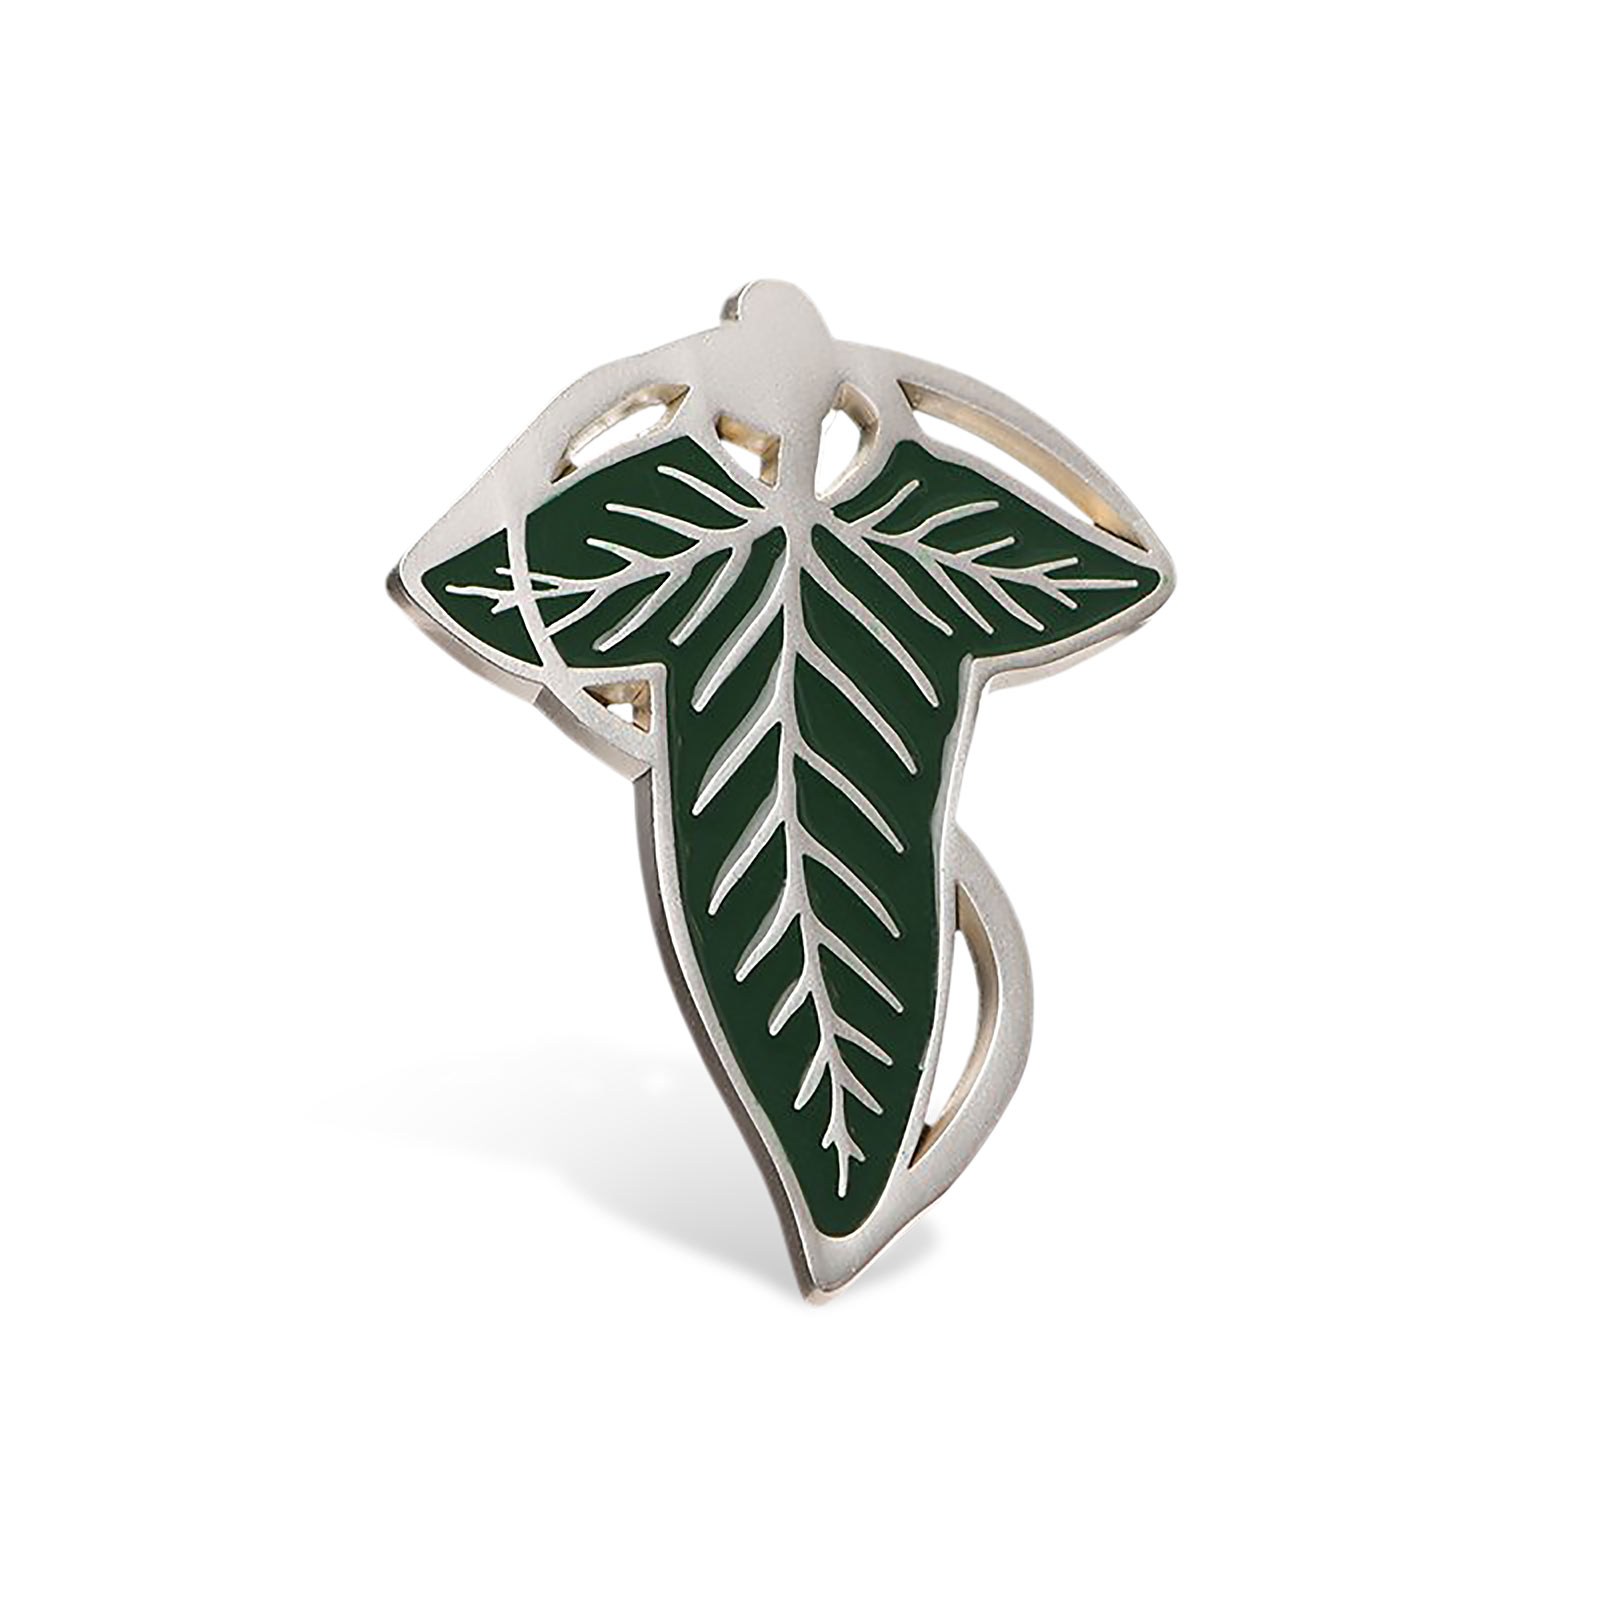 Lord of the Rings - Elven Leaf Brooch Pin